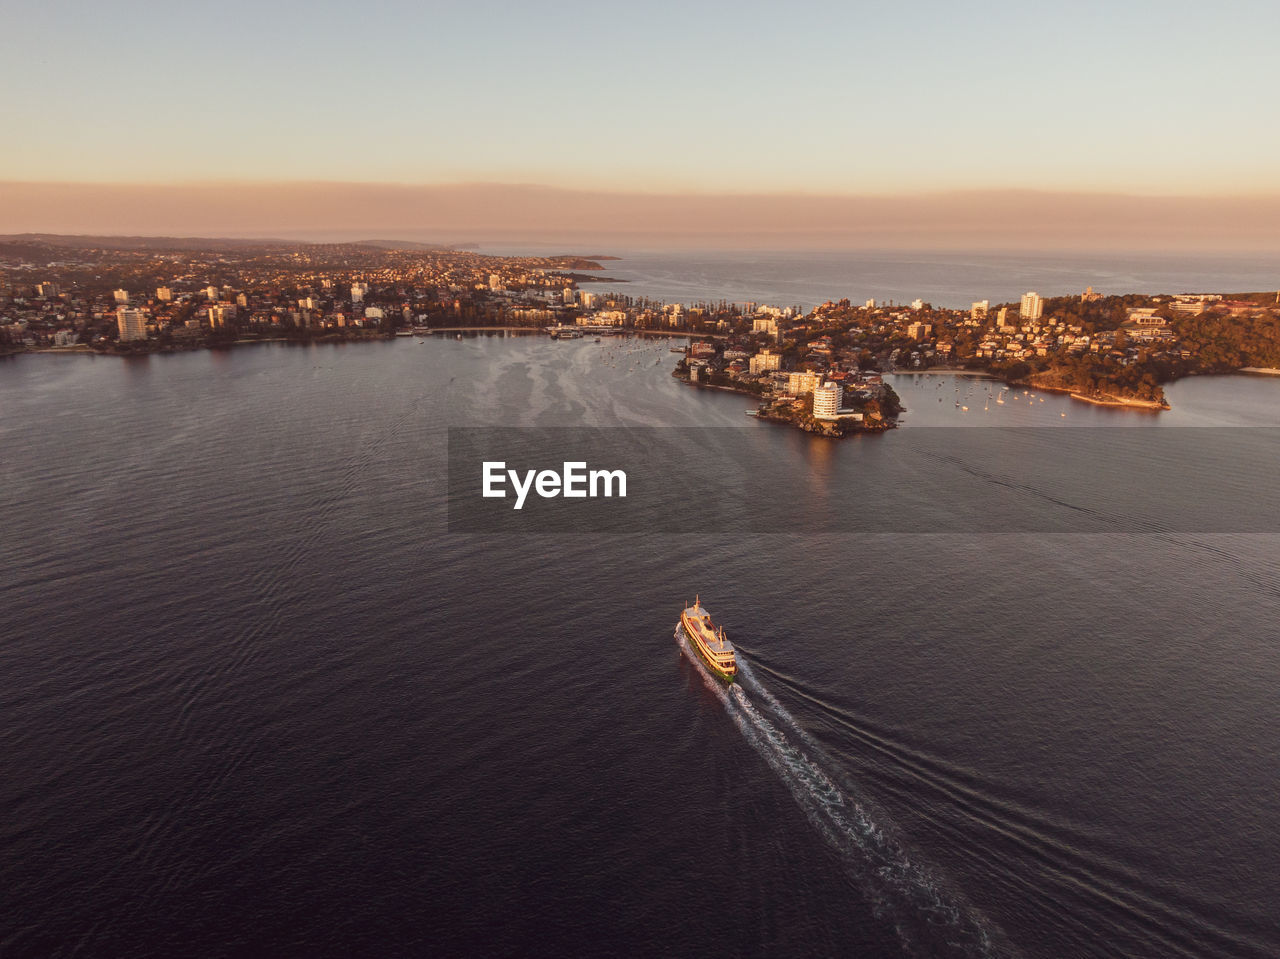 Drone view of manly, sydney, new south wales, australia. ferry from circular quay arriving at manly.